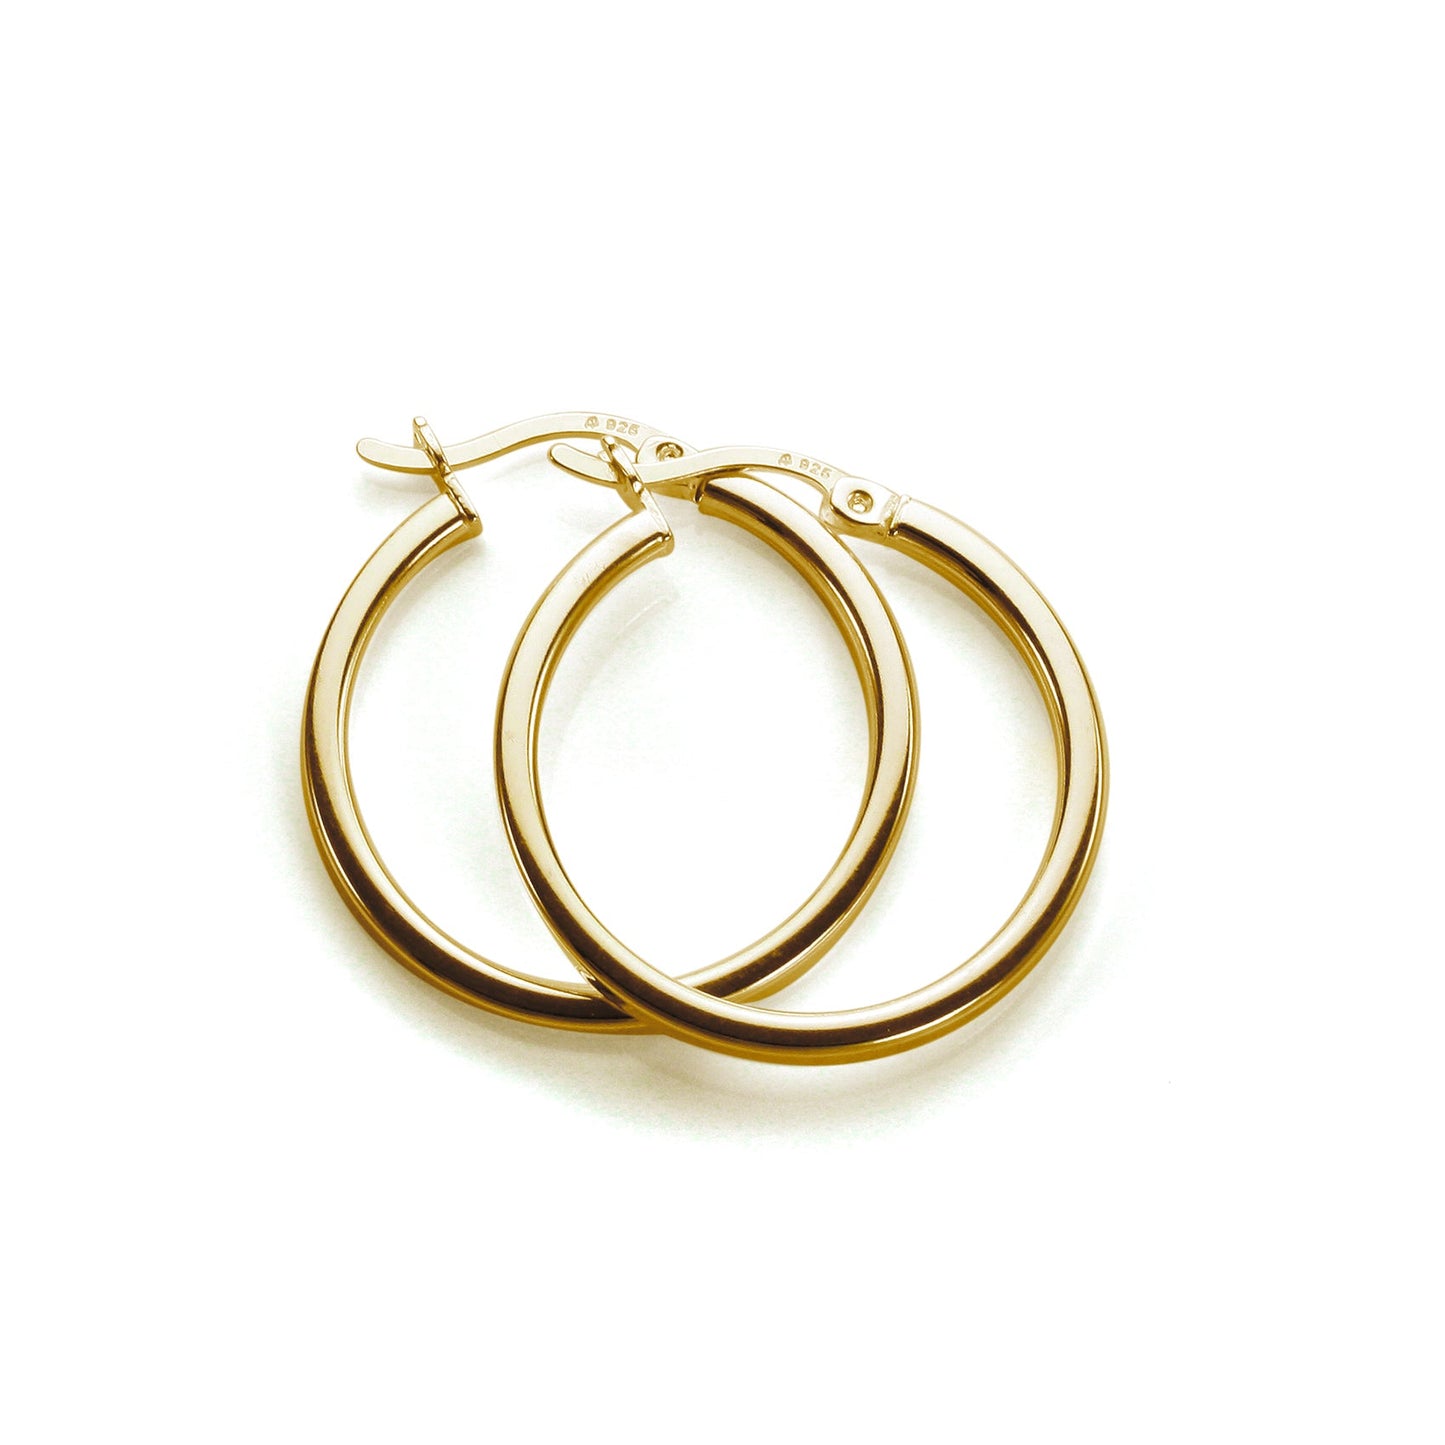 Gold Plated Sterling Silver Square Tube Hoop Earrings 12-40mm